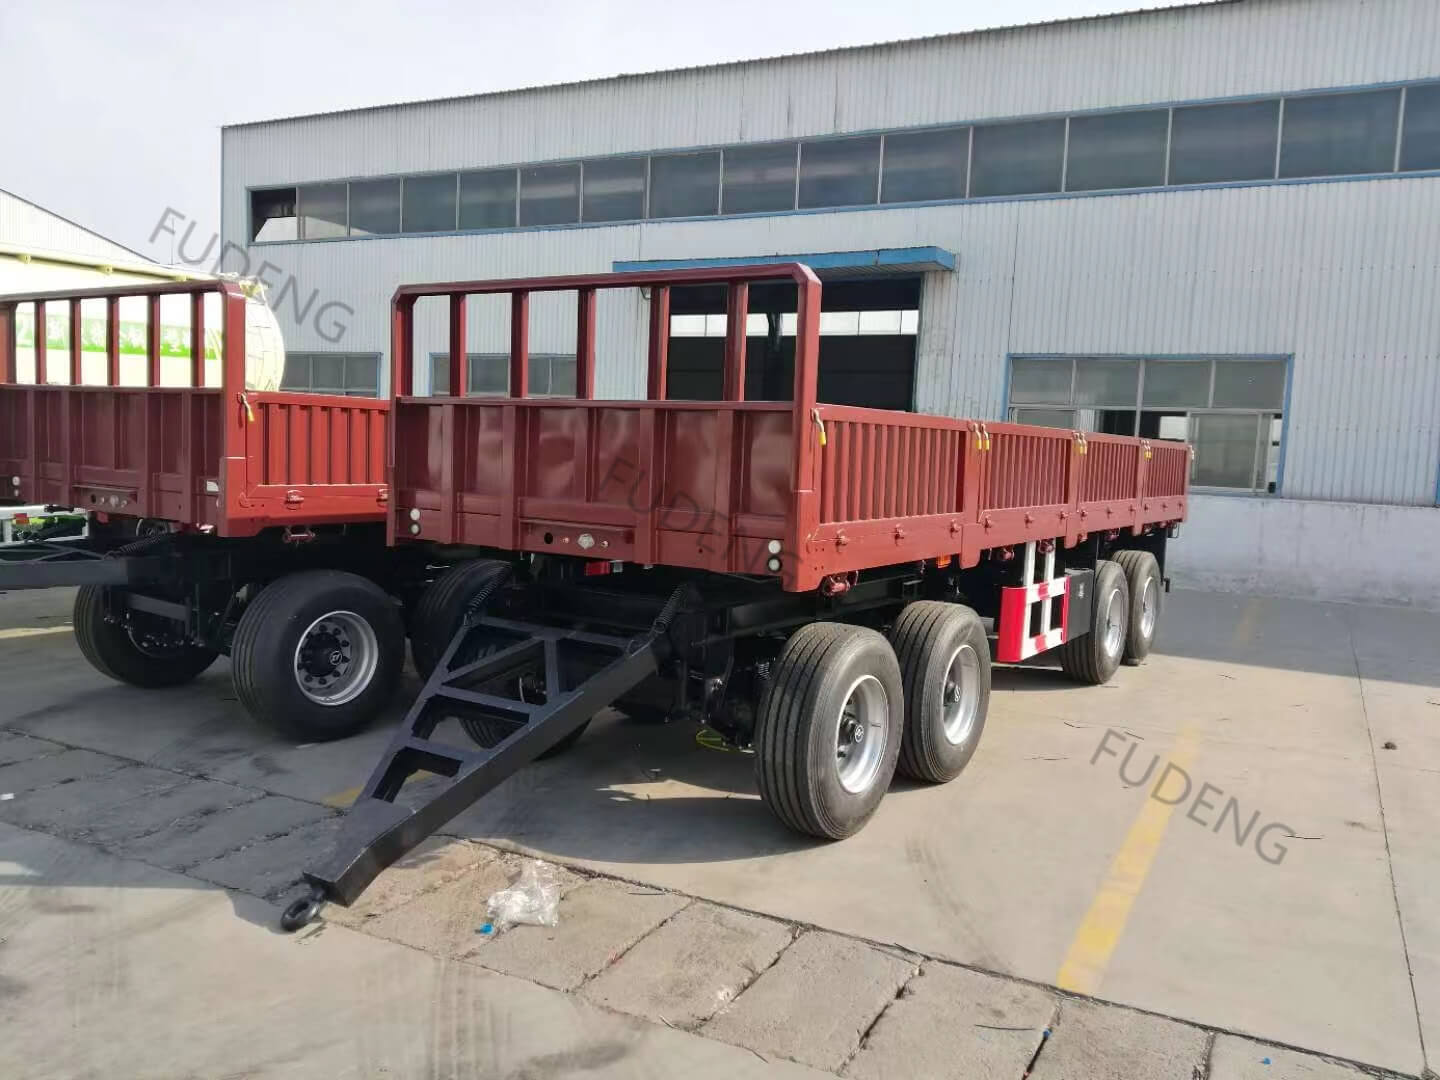 What is the Difference between semi trailer and drawbar trailer?